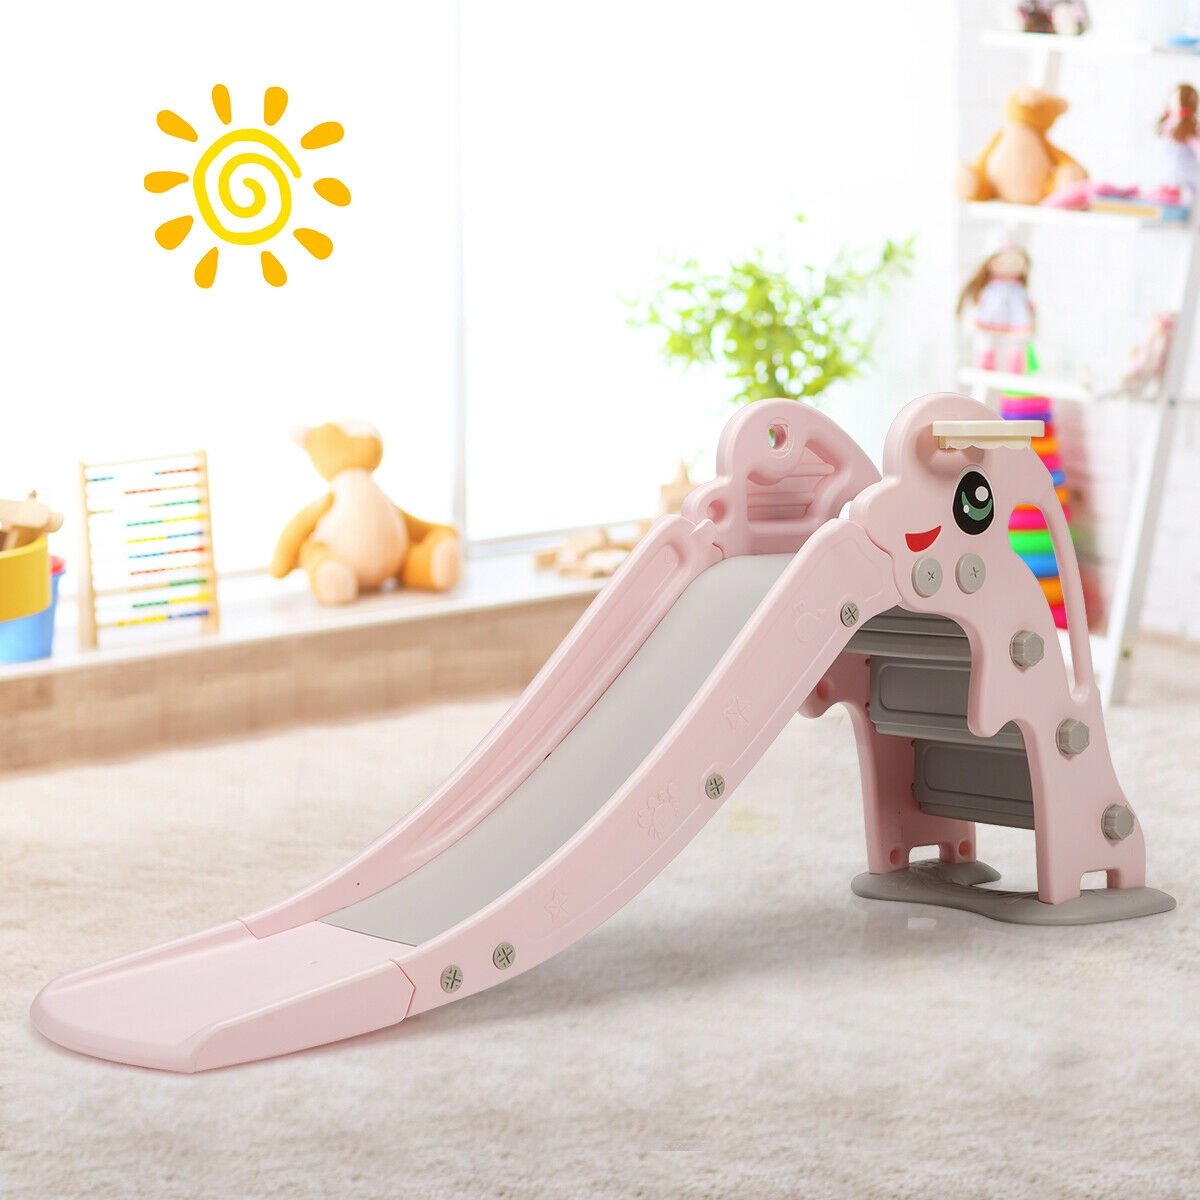 3-in-1 Kids Climber Slide Play Set  with Basketball Hoop and Ball, Pink at Gallery Canada